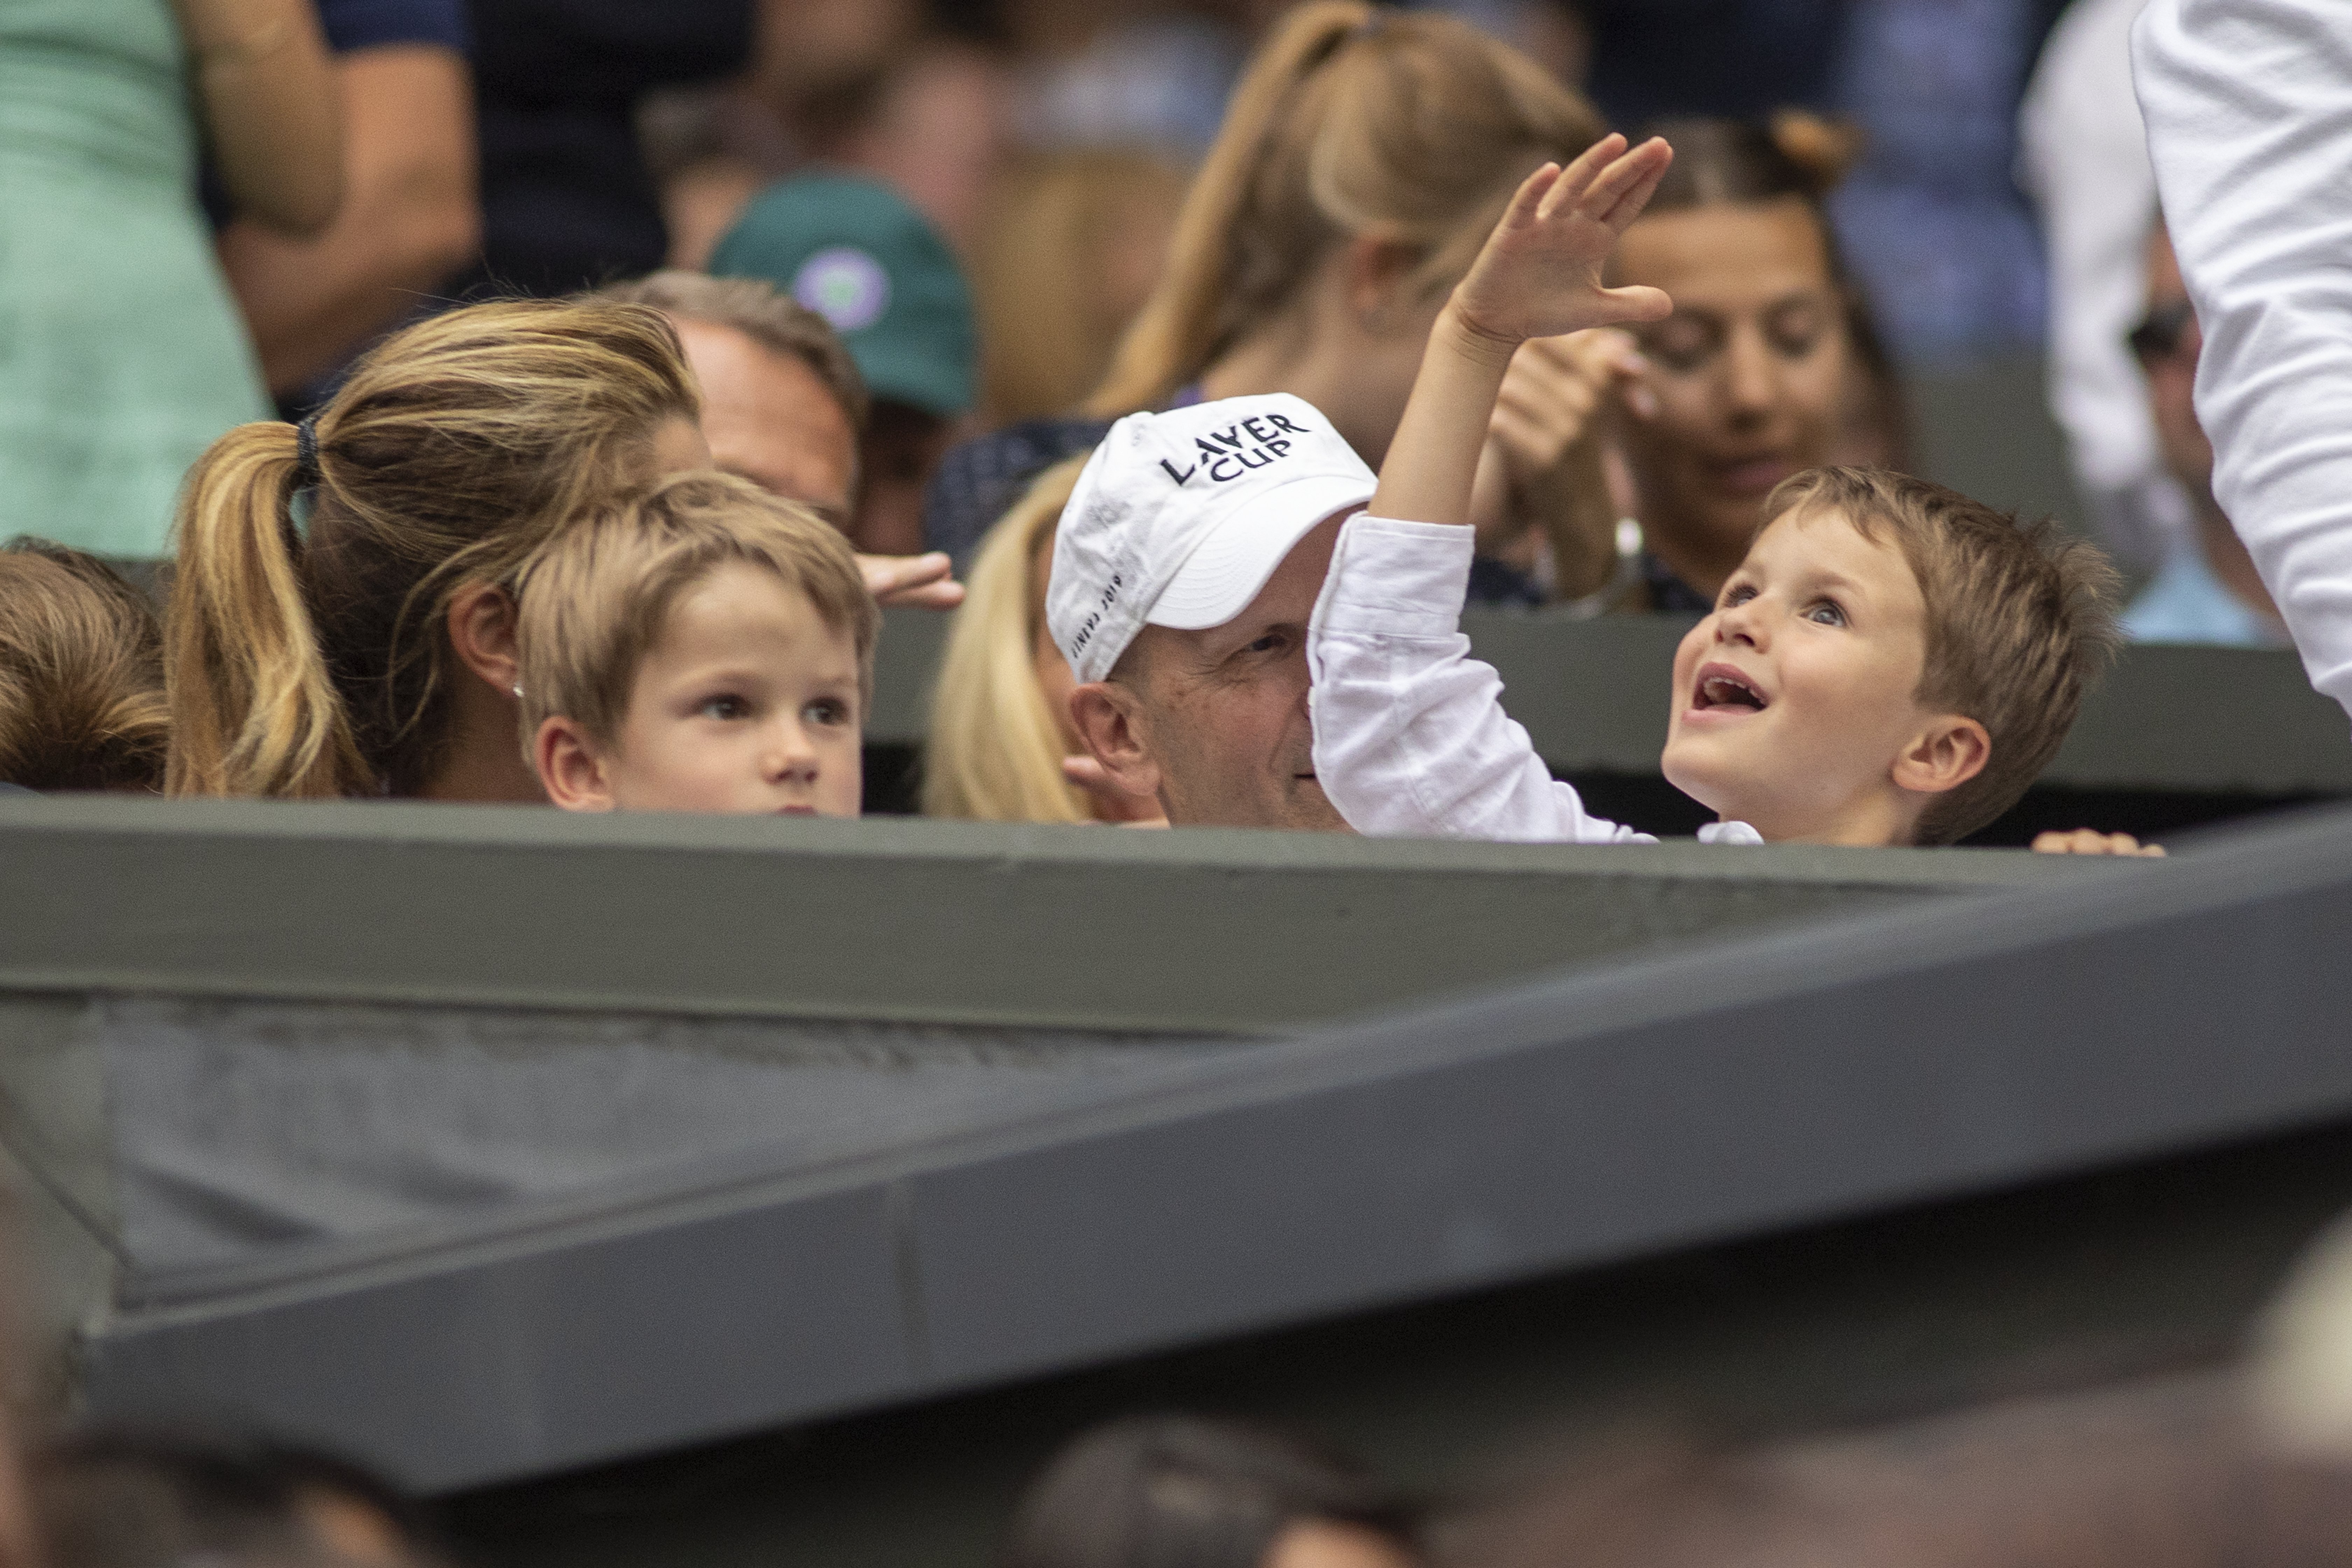 Lennert "Lenny" Federer raises his right hand beside his brother Leo during their father Roger Federer's match against Matteo Berrettini of Italy at Wimbledon on July 8, 2019, in London, England. | Source: Getty Images